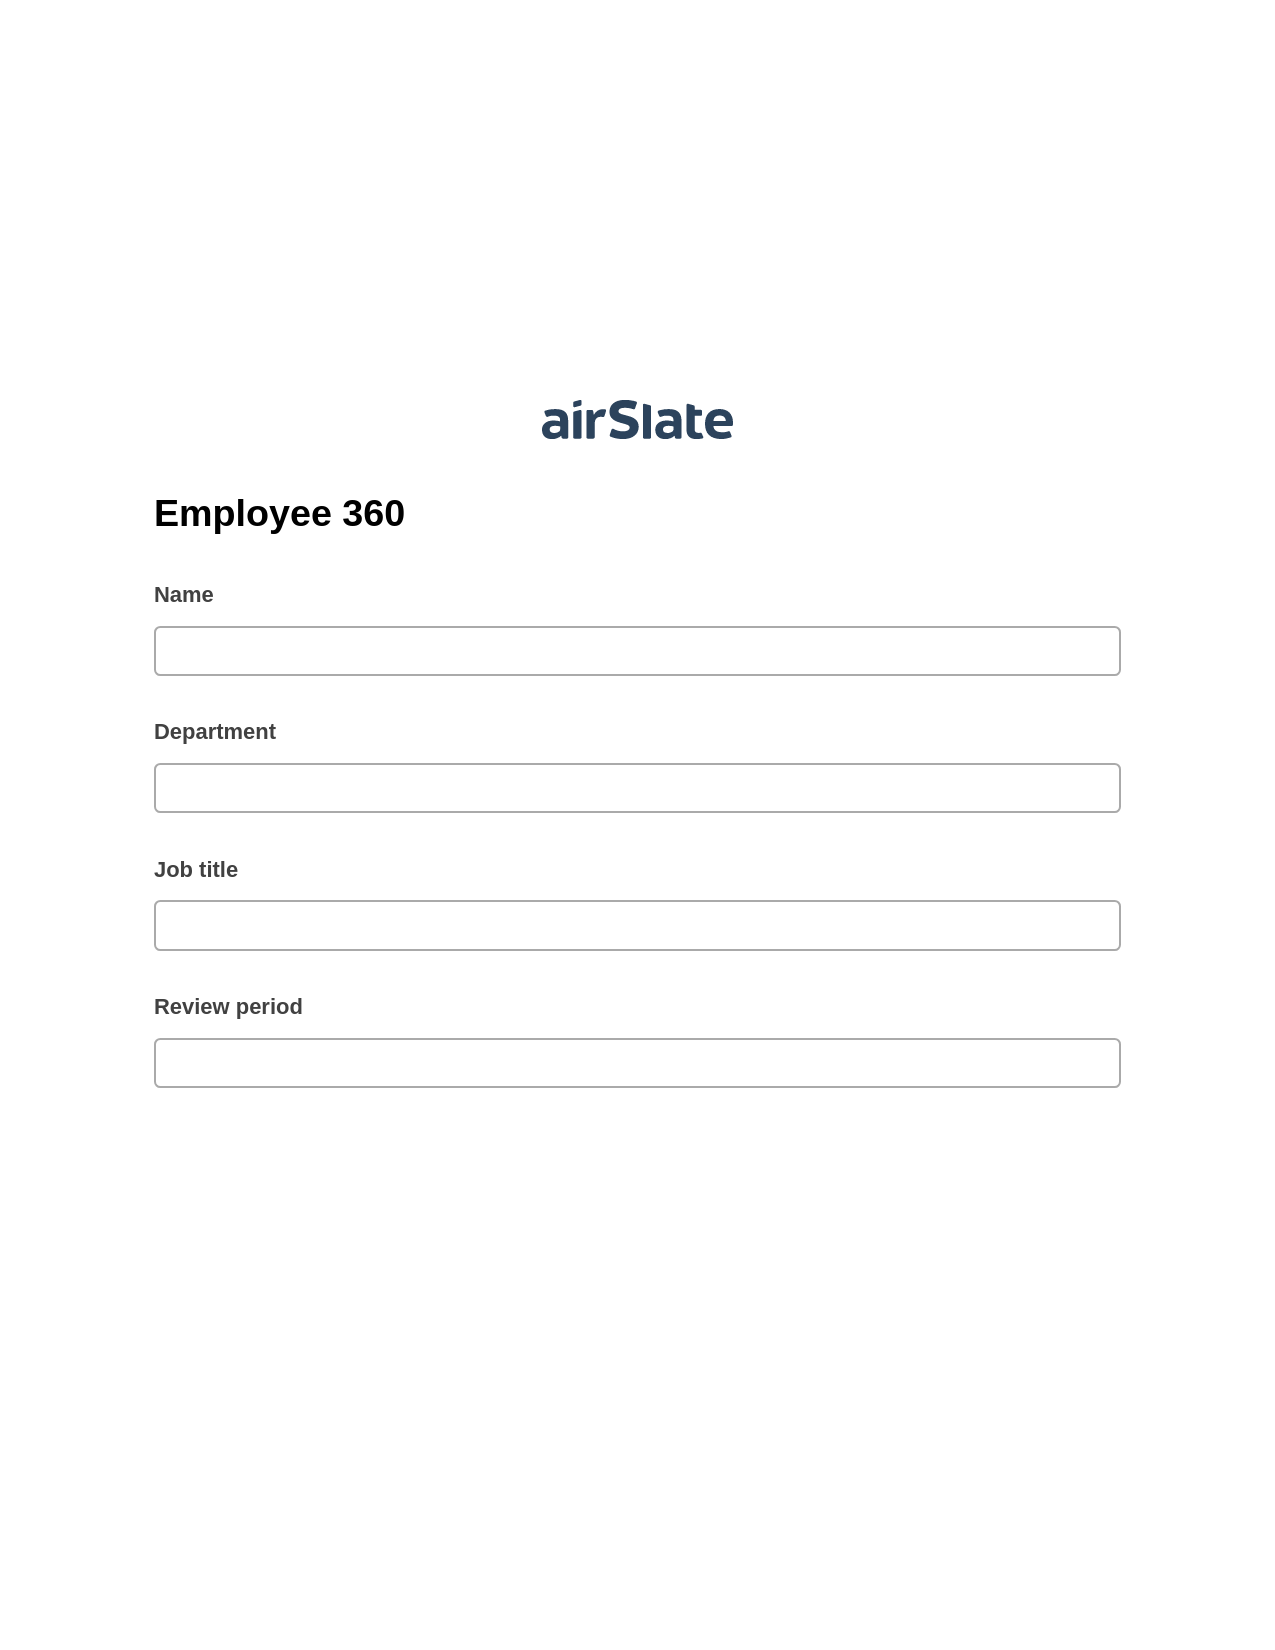 Employee 360 Pre-fill from AirTable Bot, Update MS Dynamics 365 Record Bot, Archive to Dropbox Bot